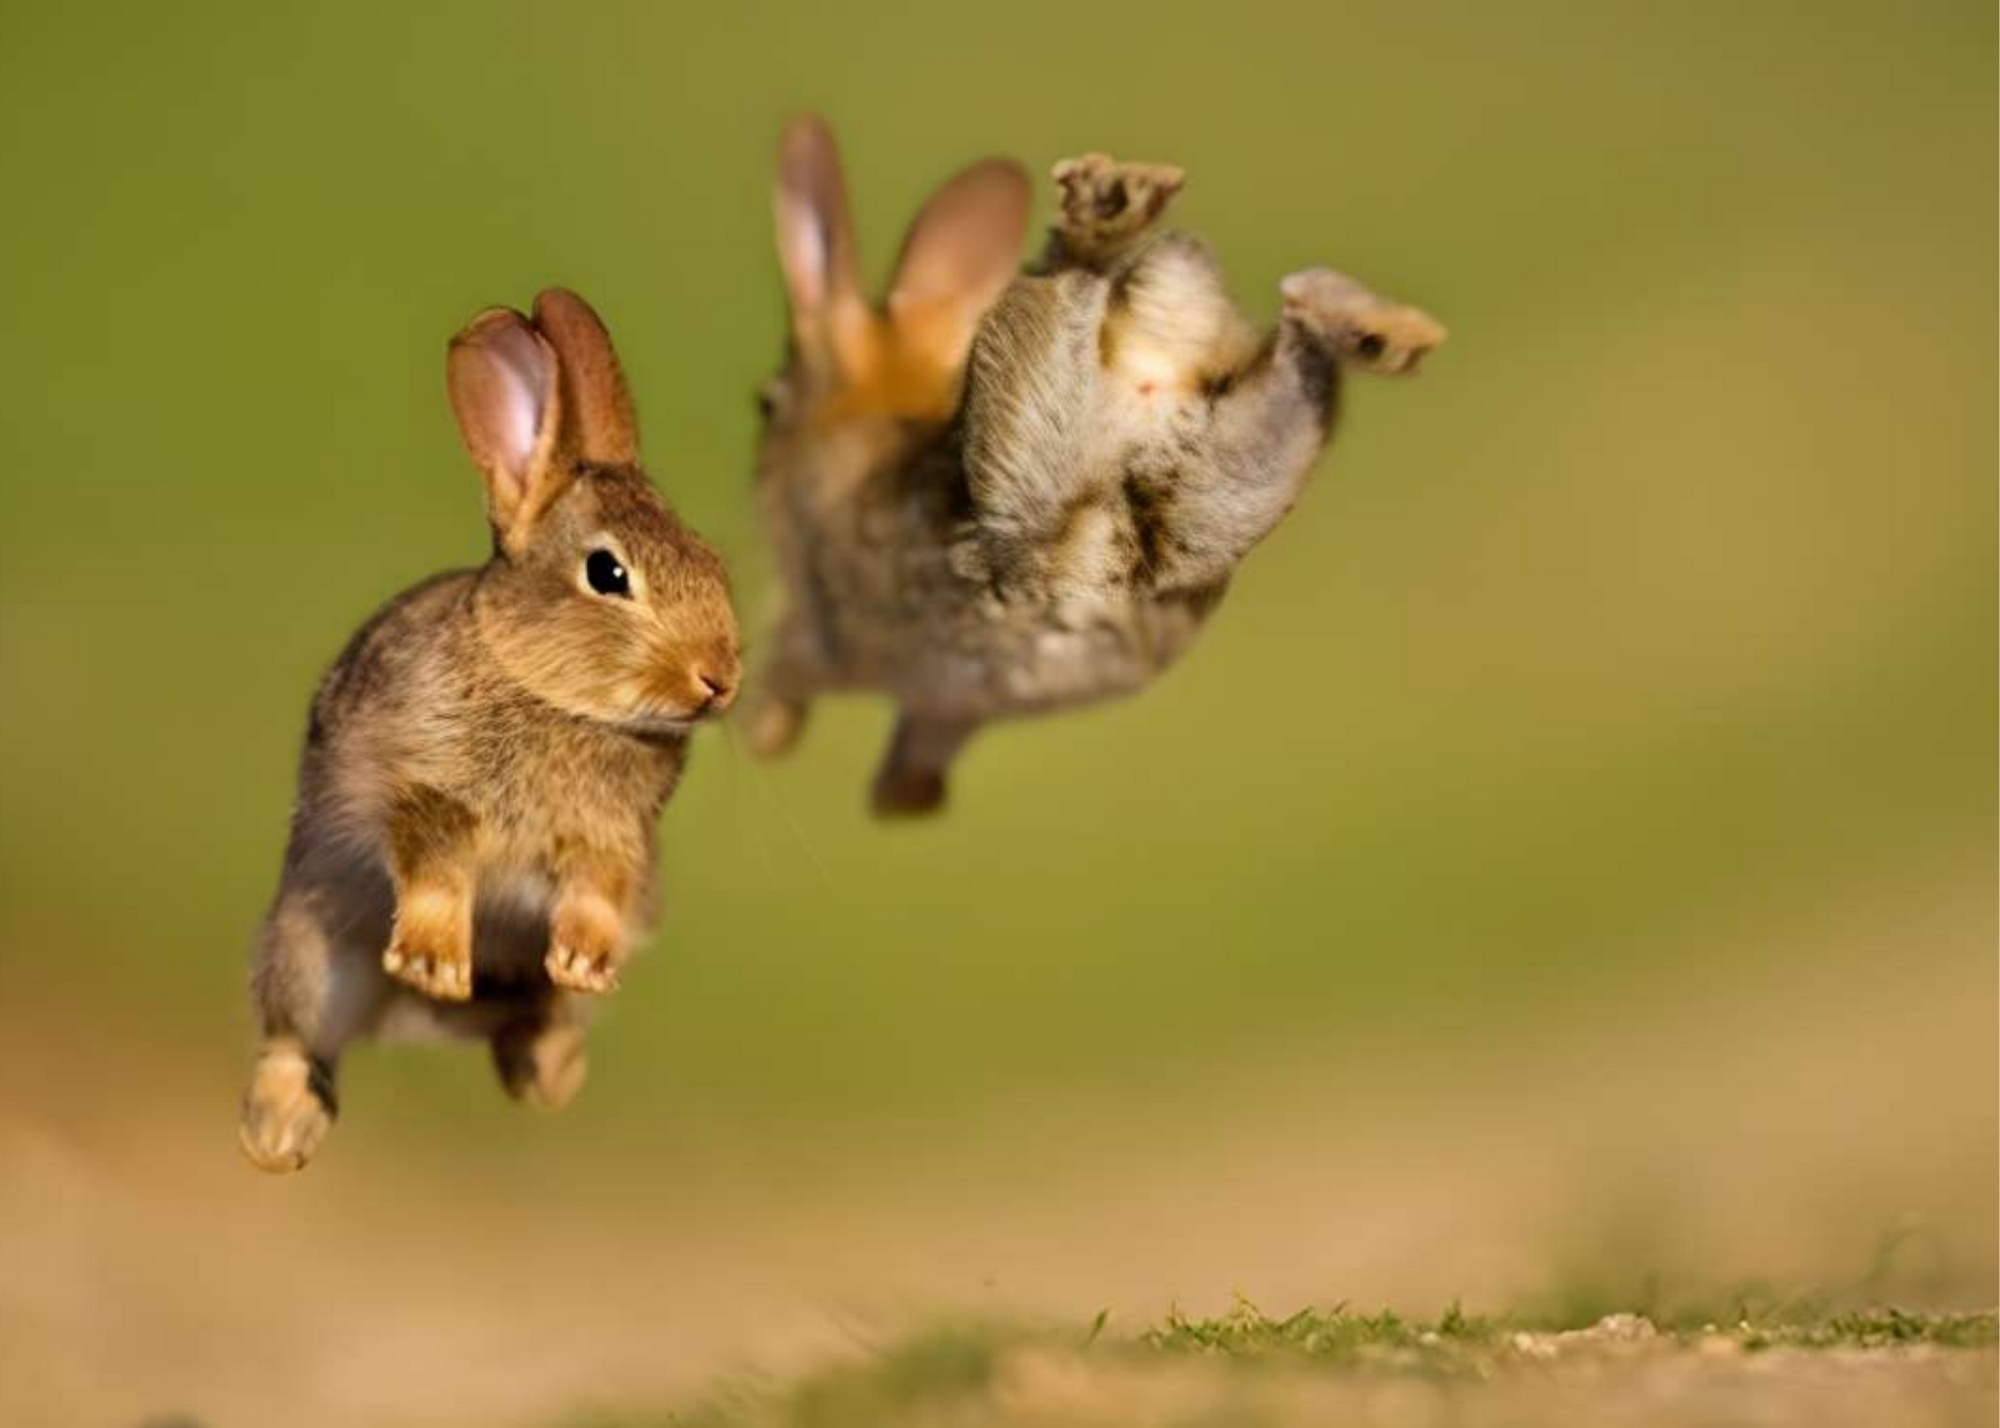 How High Can Rabbit Jump - Funny Videos You Should Watch